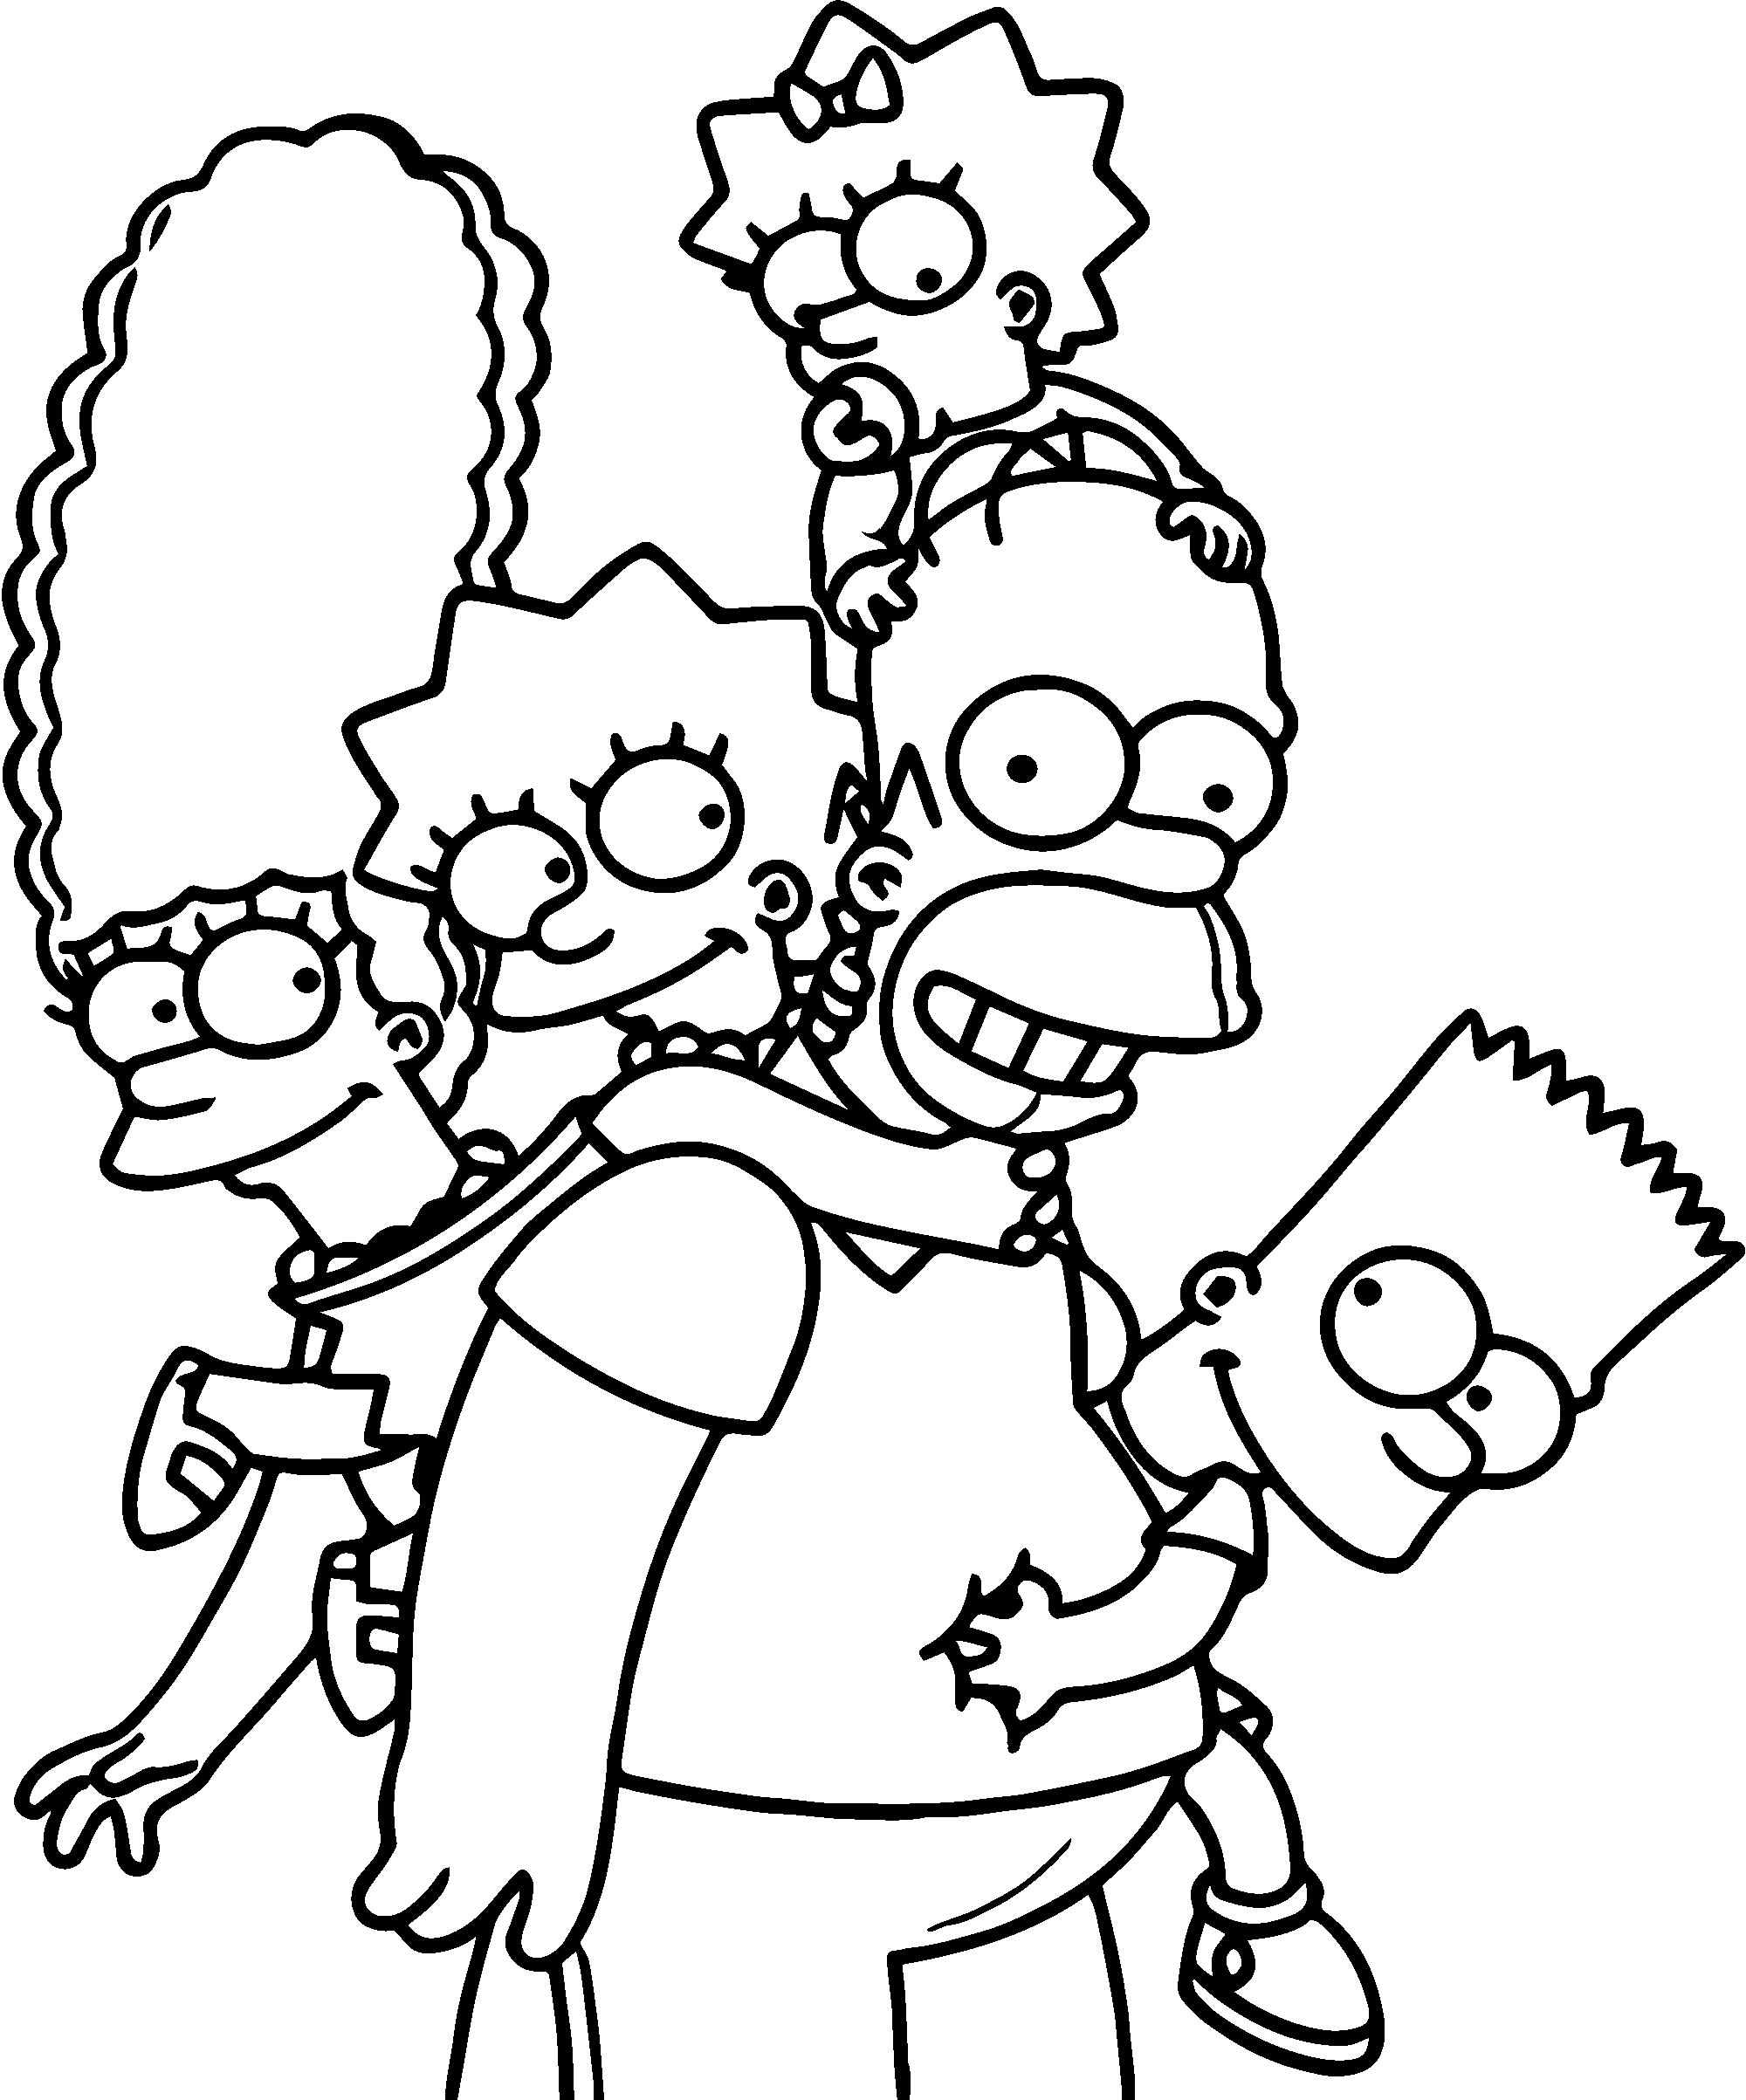 The Simpsons Coloring Page - Free Printable Templates